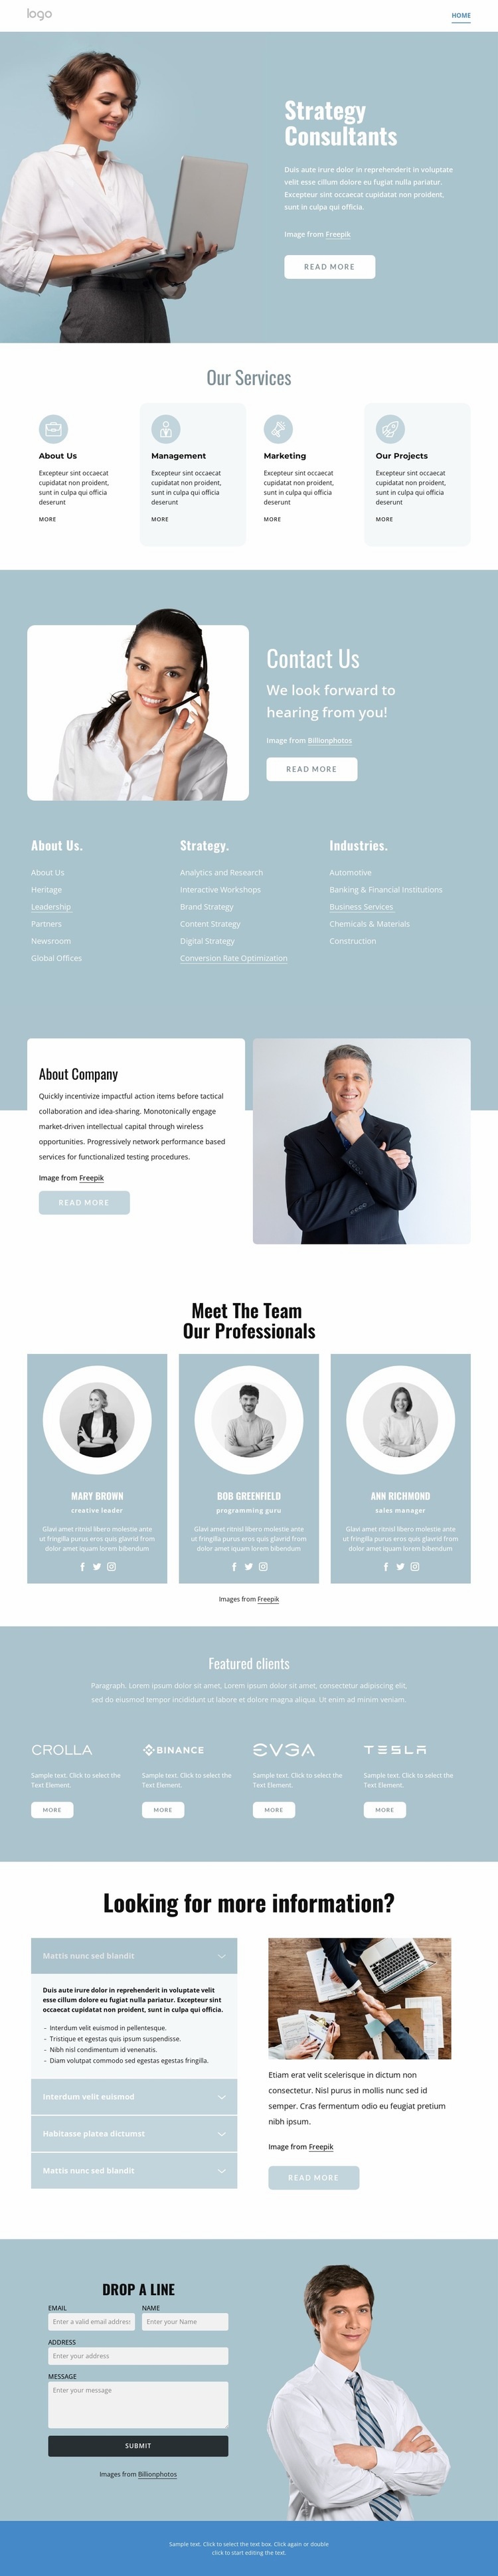 Strategy connsultants Web Page Design